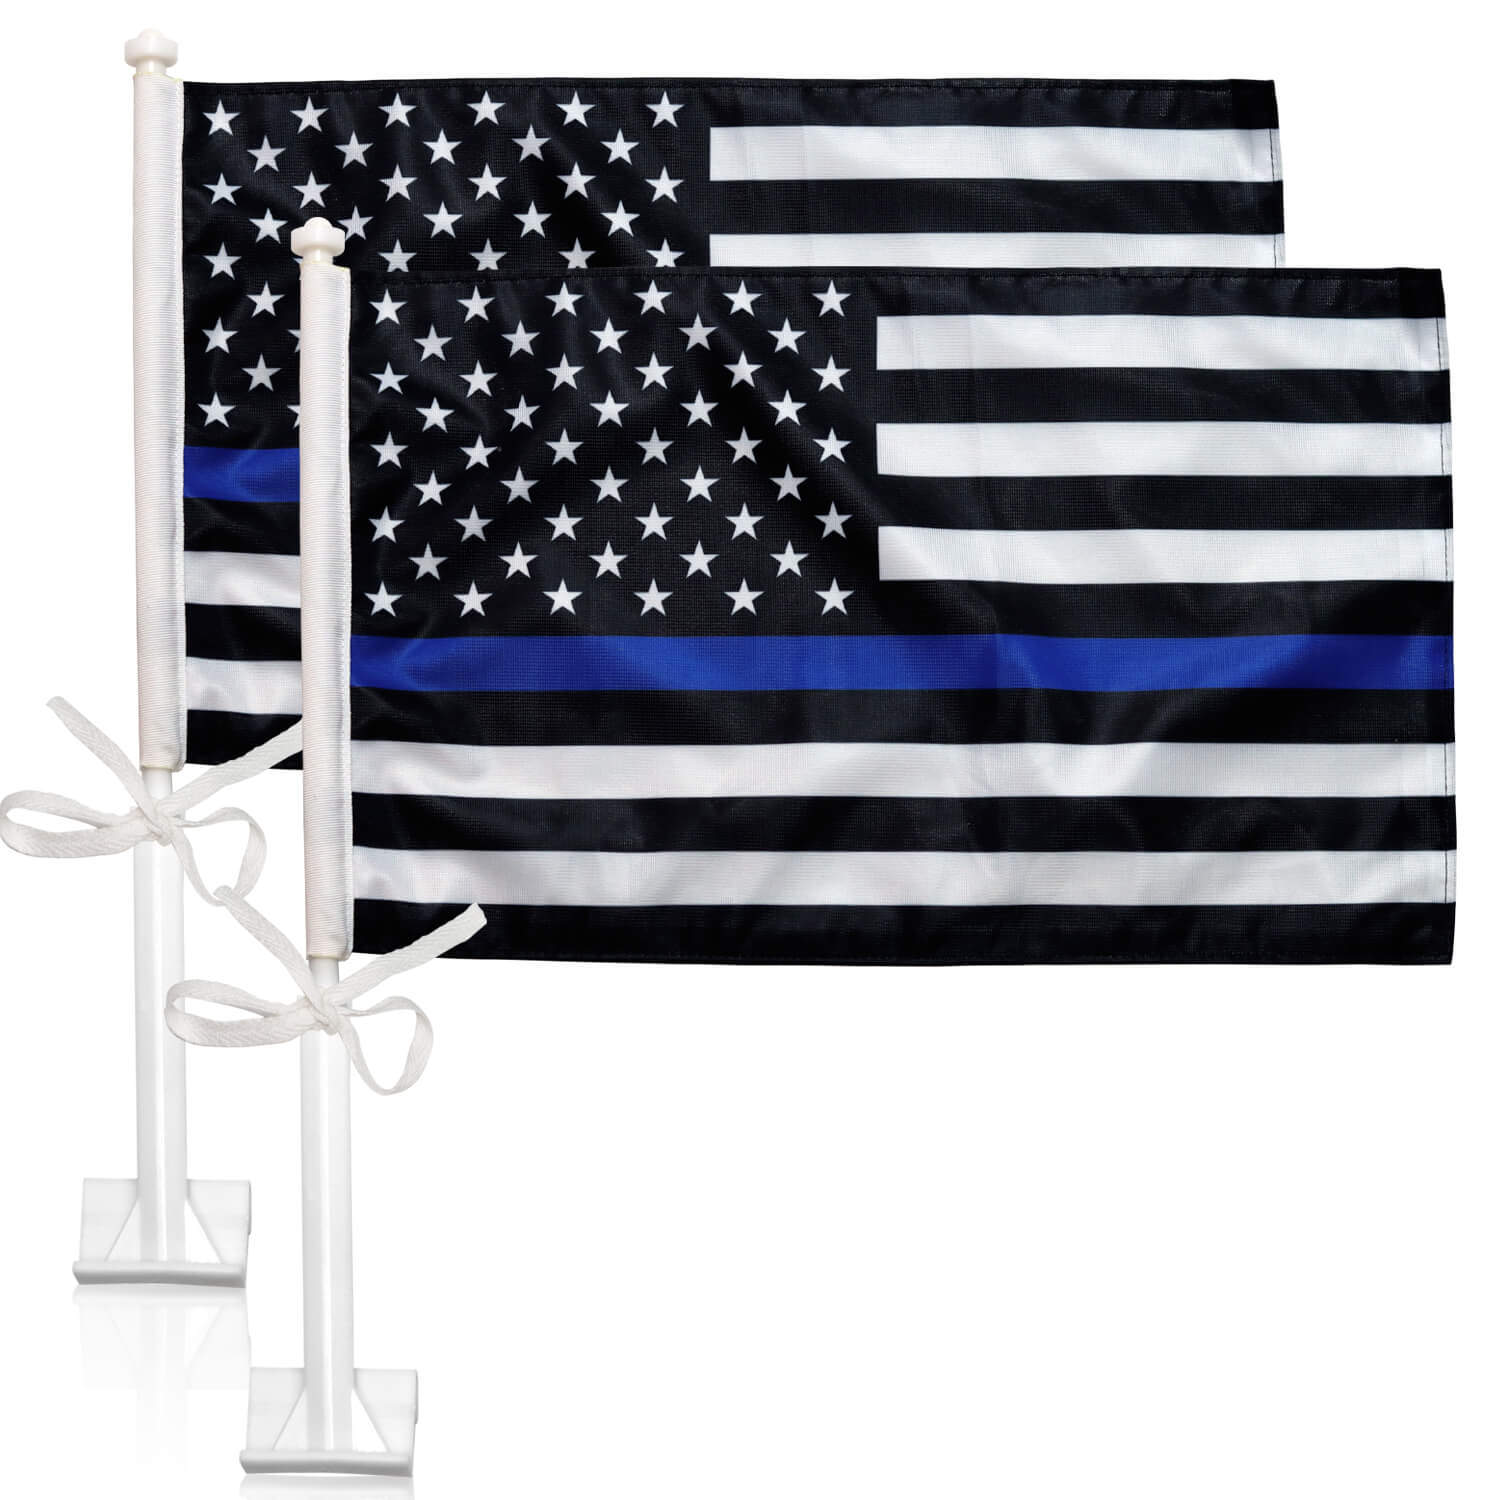 Fire Fighter Firefighter Police American Law Thin RED & BLUE Line Flag 3x5 Ft 